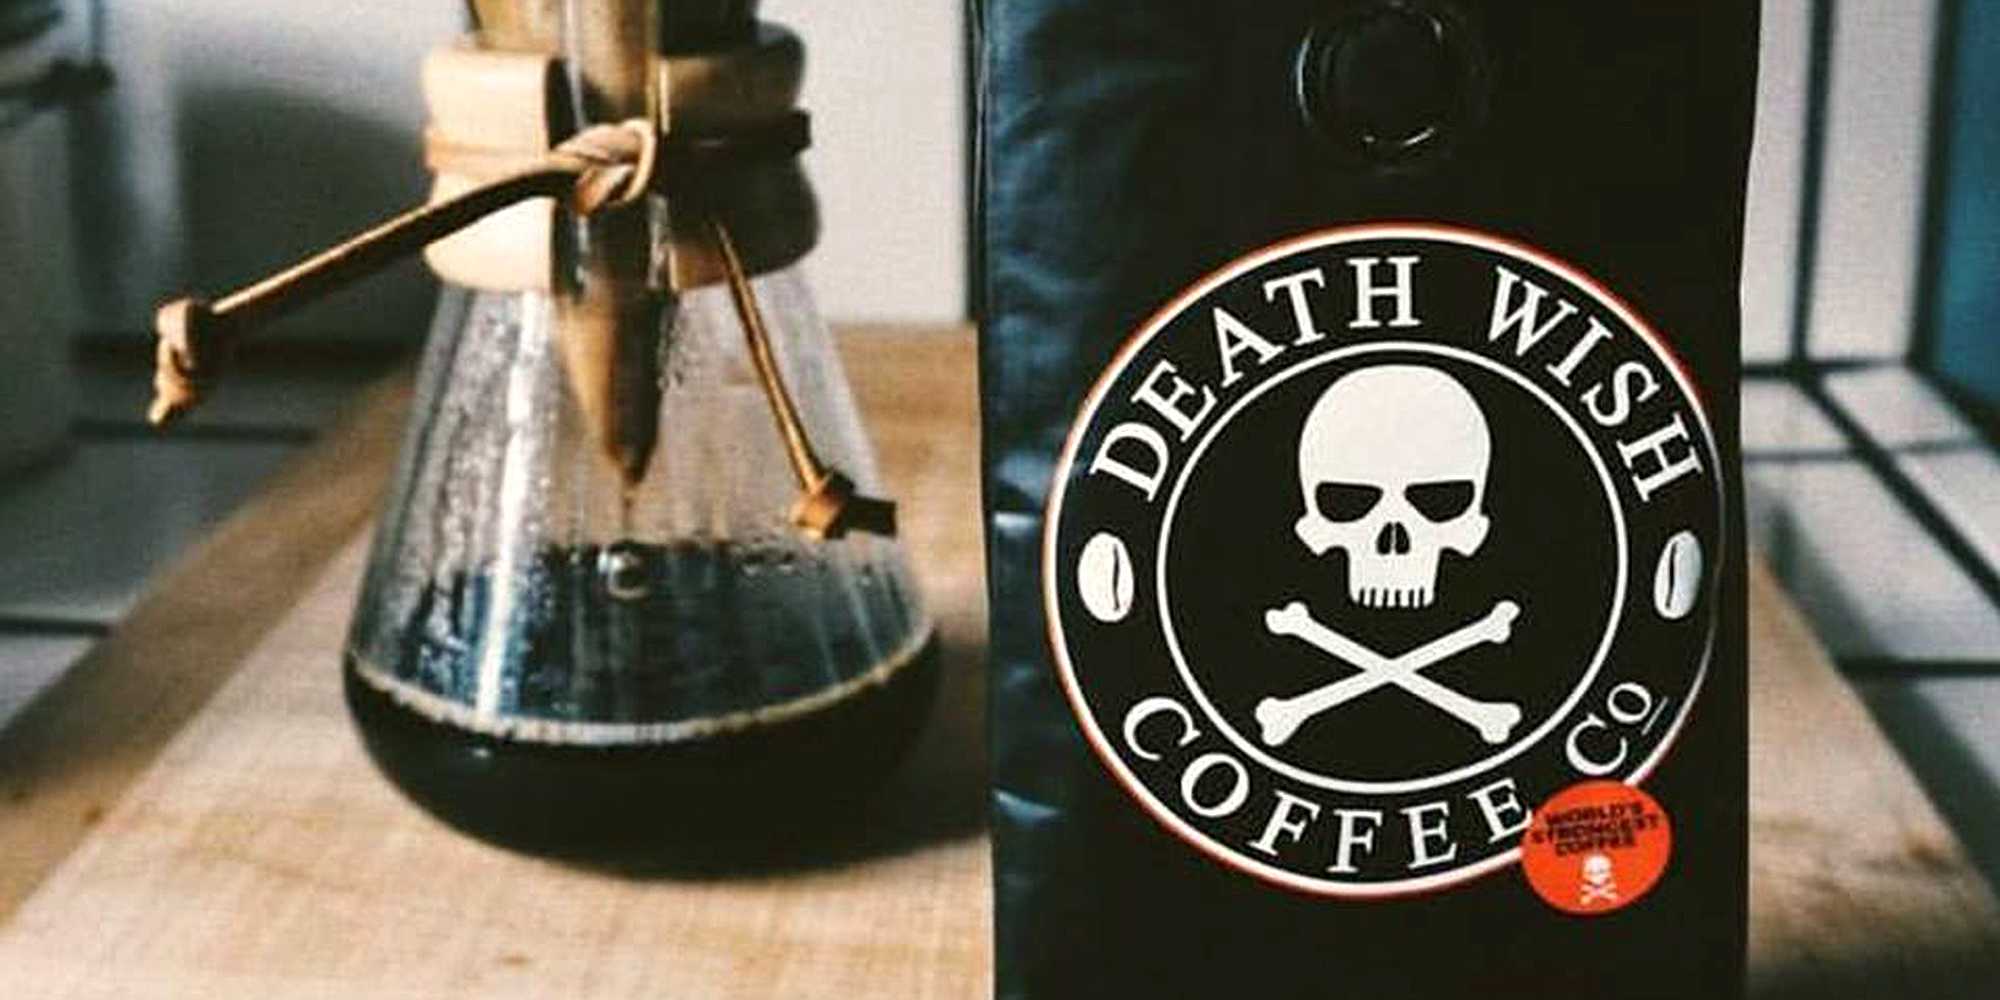 Death Wish cold brew coffee recalled for potentially being deadly